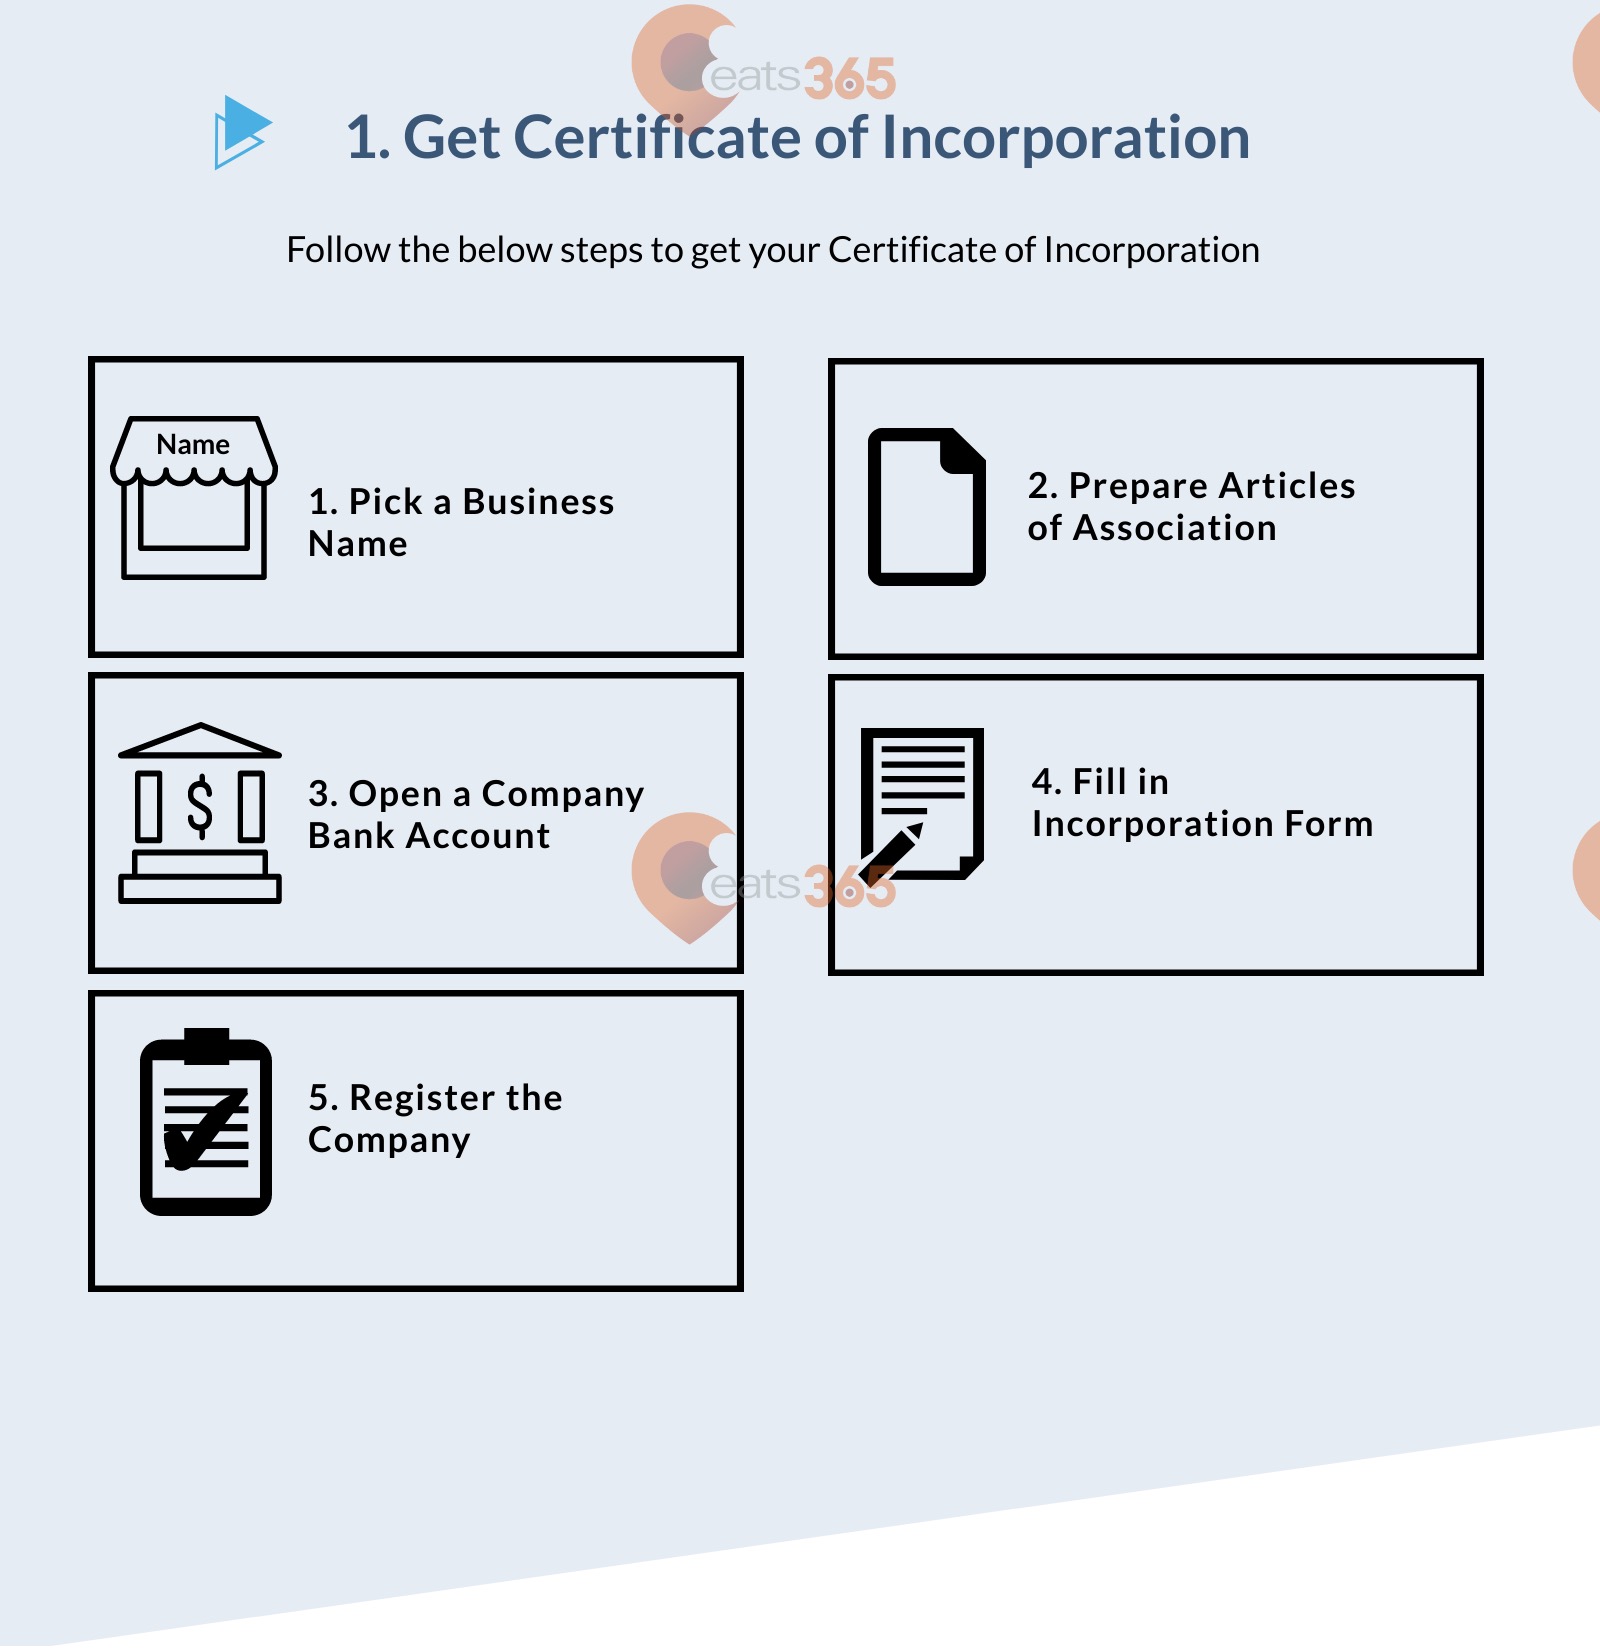 How to apply for certificate of incorporation Hong Kong